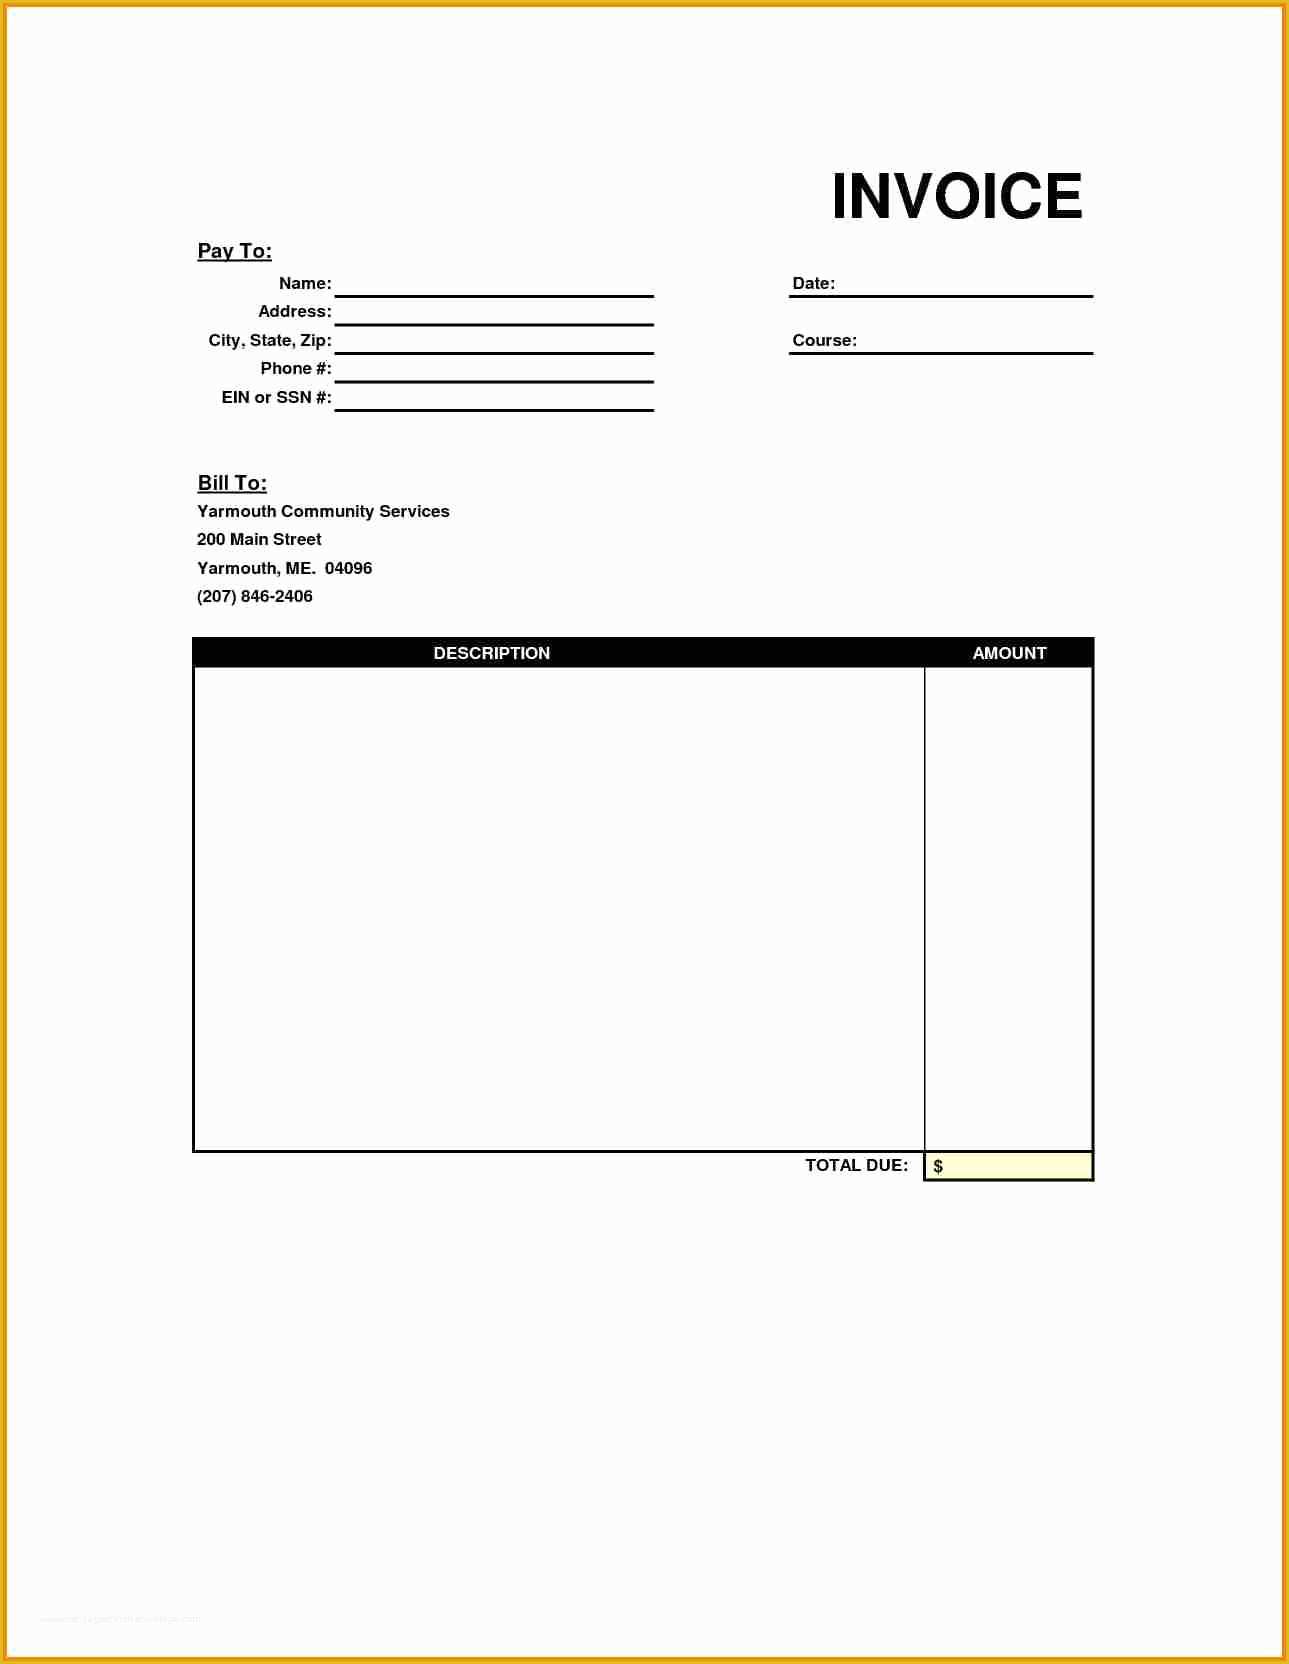 Free Bakery Invoice Template Word Of Invoice Template for Bakery Fdecf27b0c50 Proshredelite